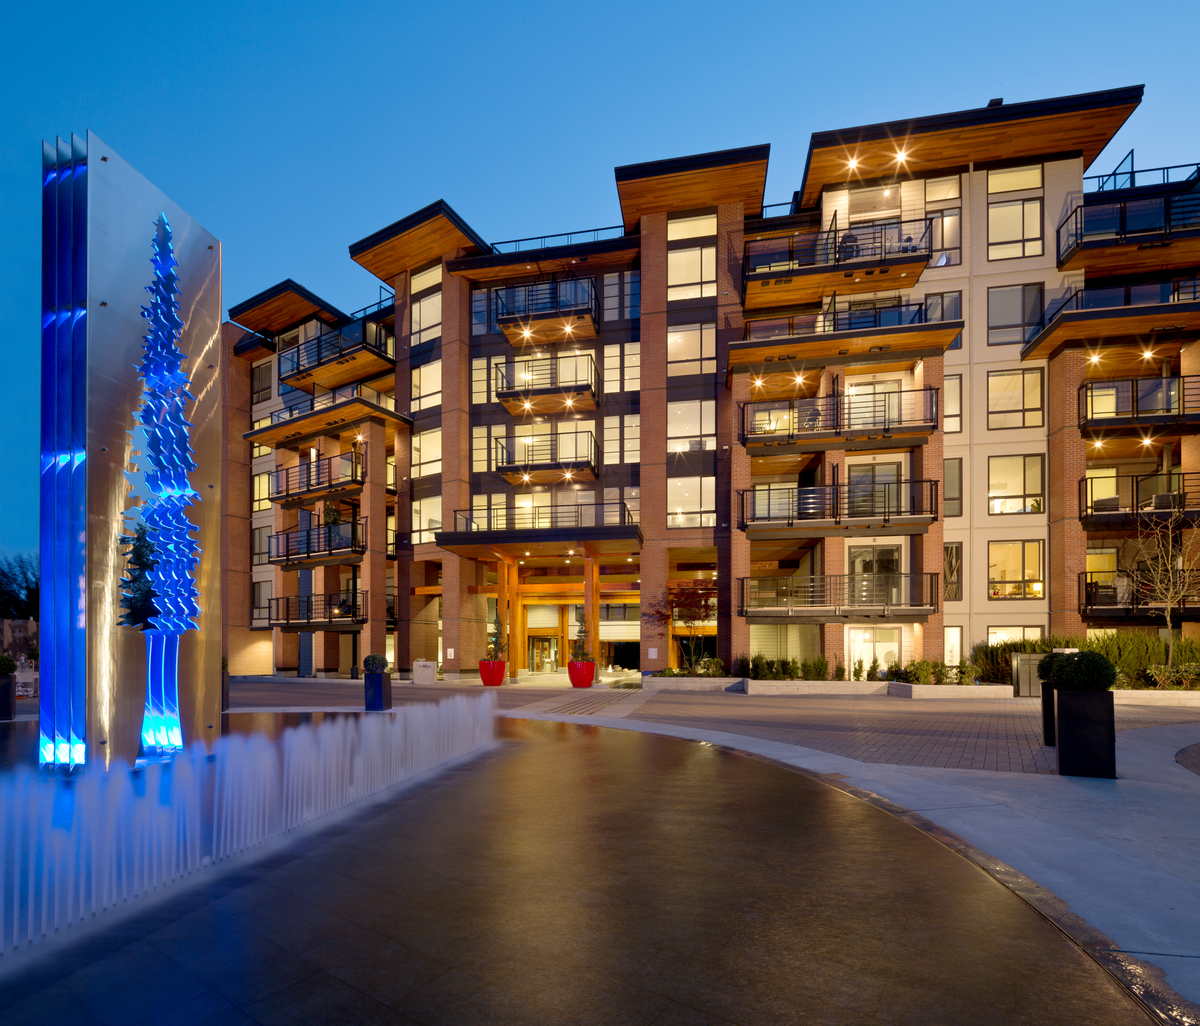 Exterior evening view of multi-storey 28,000 square metres 'The Shore', a multi-building residential development, with many large wooden decks and balconies